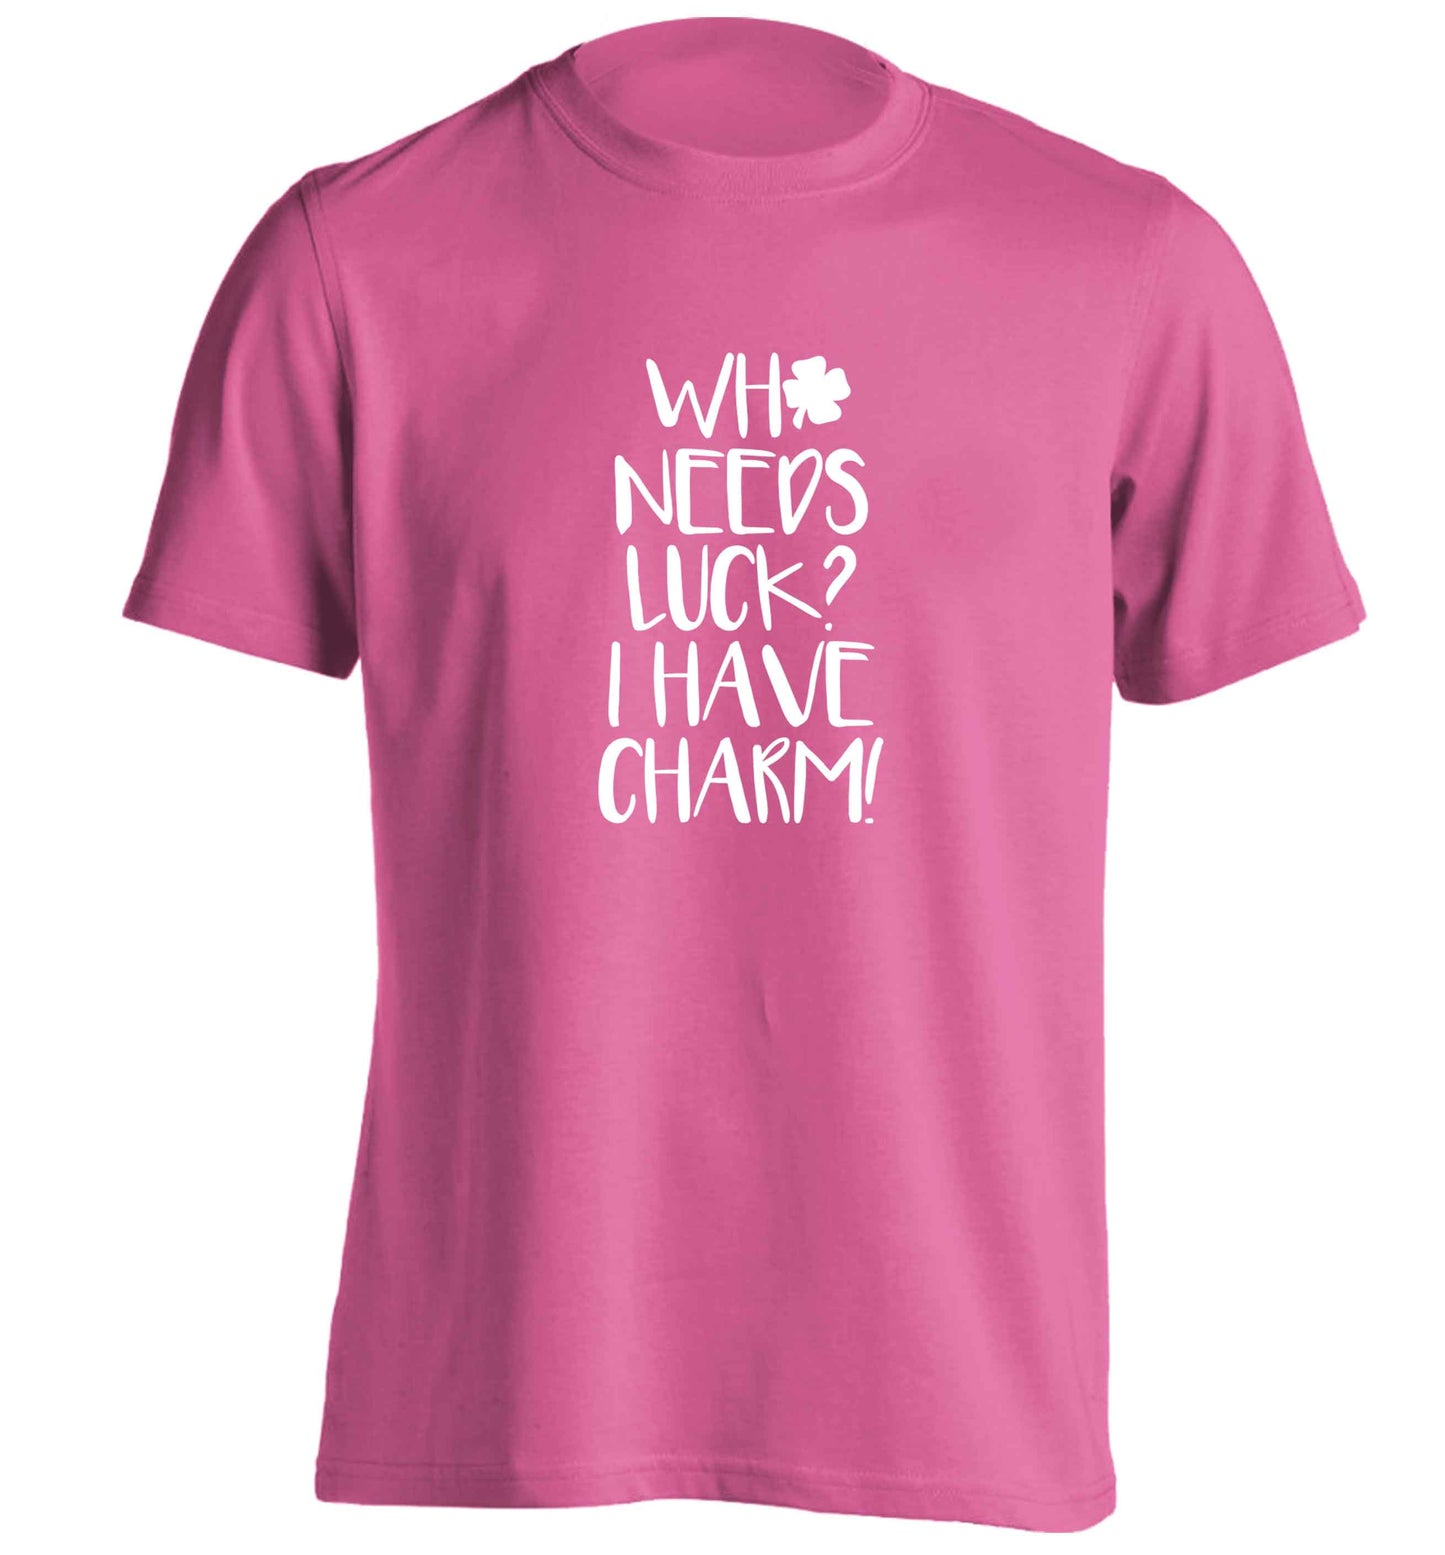 Who needs luck? I have charm! adults unisex pink Tshirt 2XL